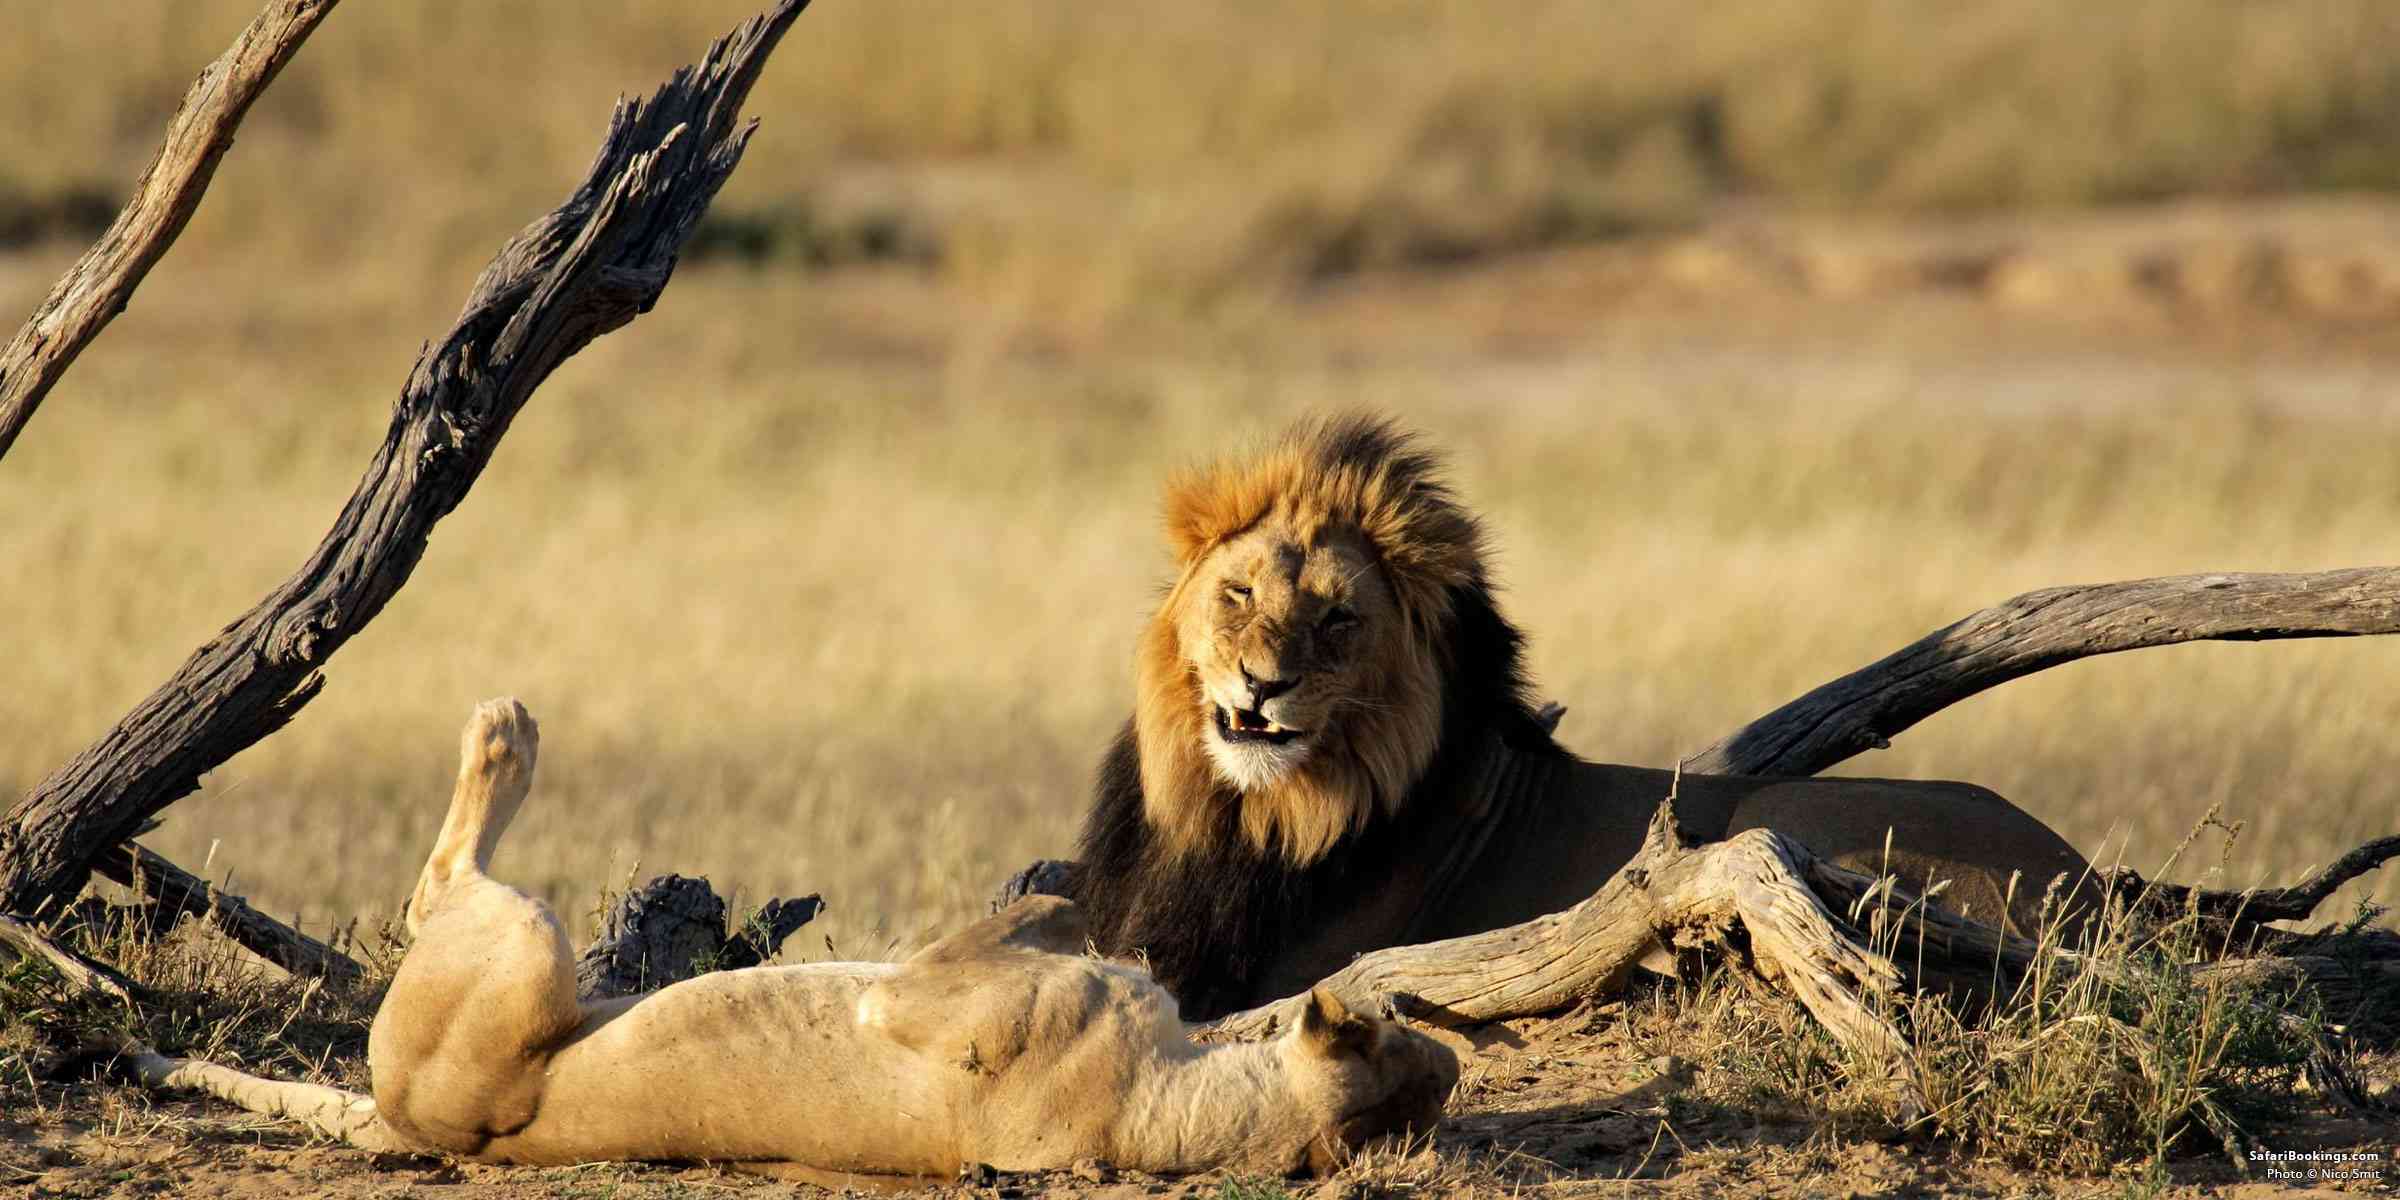 Botswana vs South Africa: Which Is Better for an African Safari?